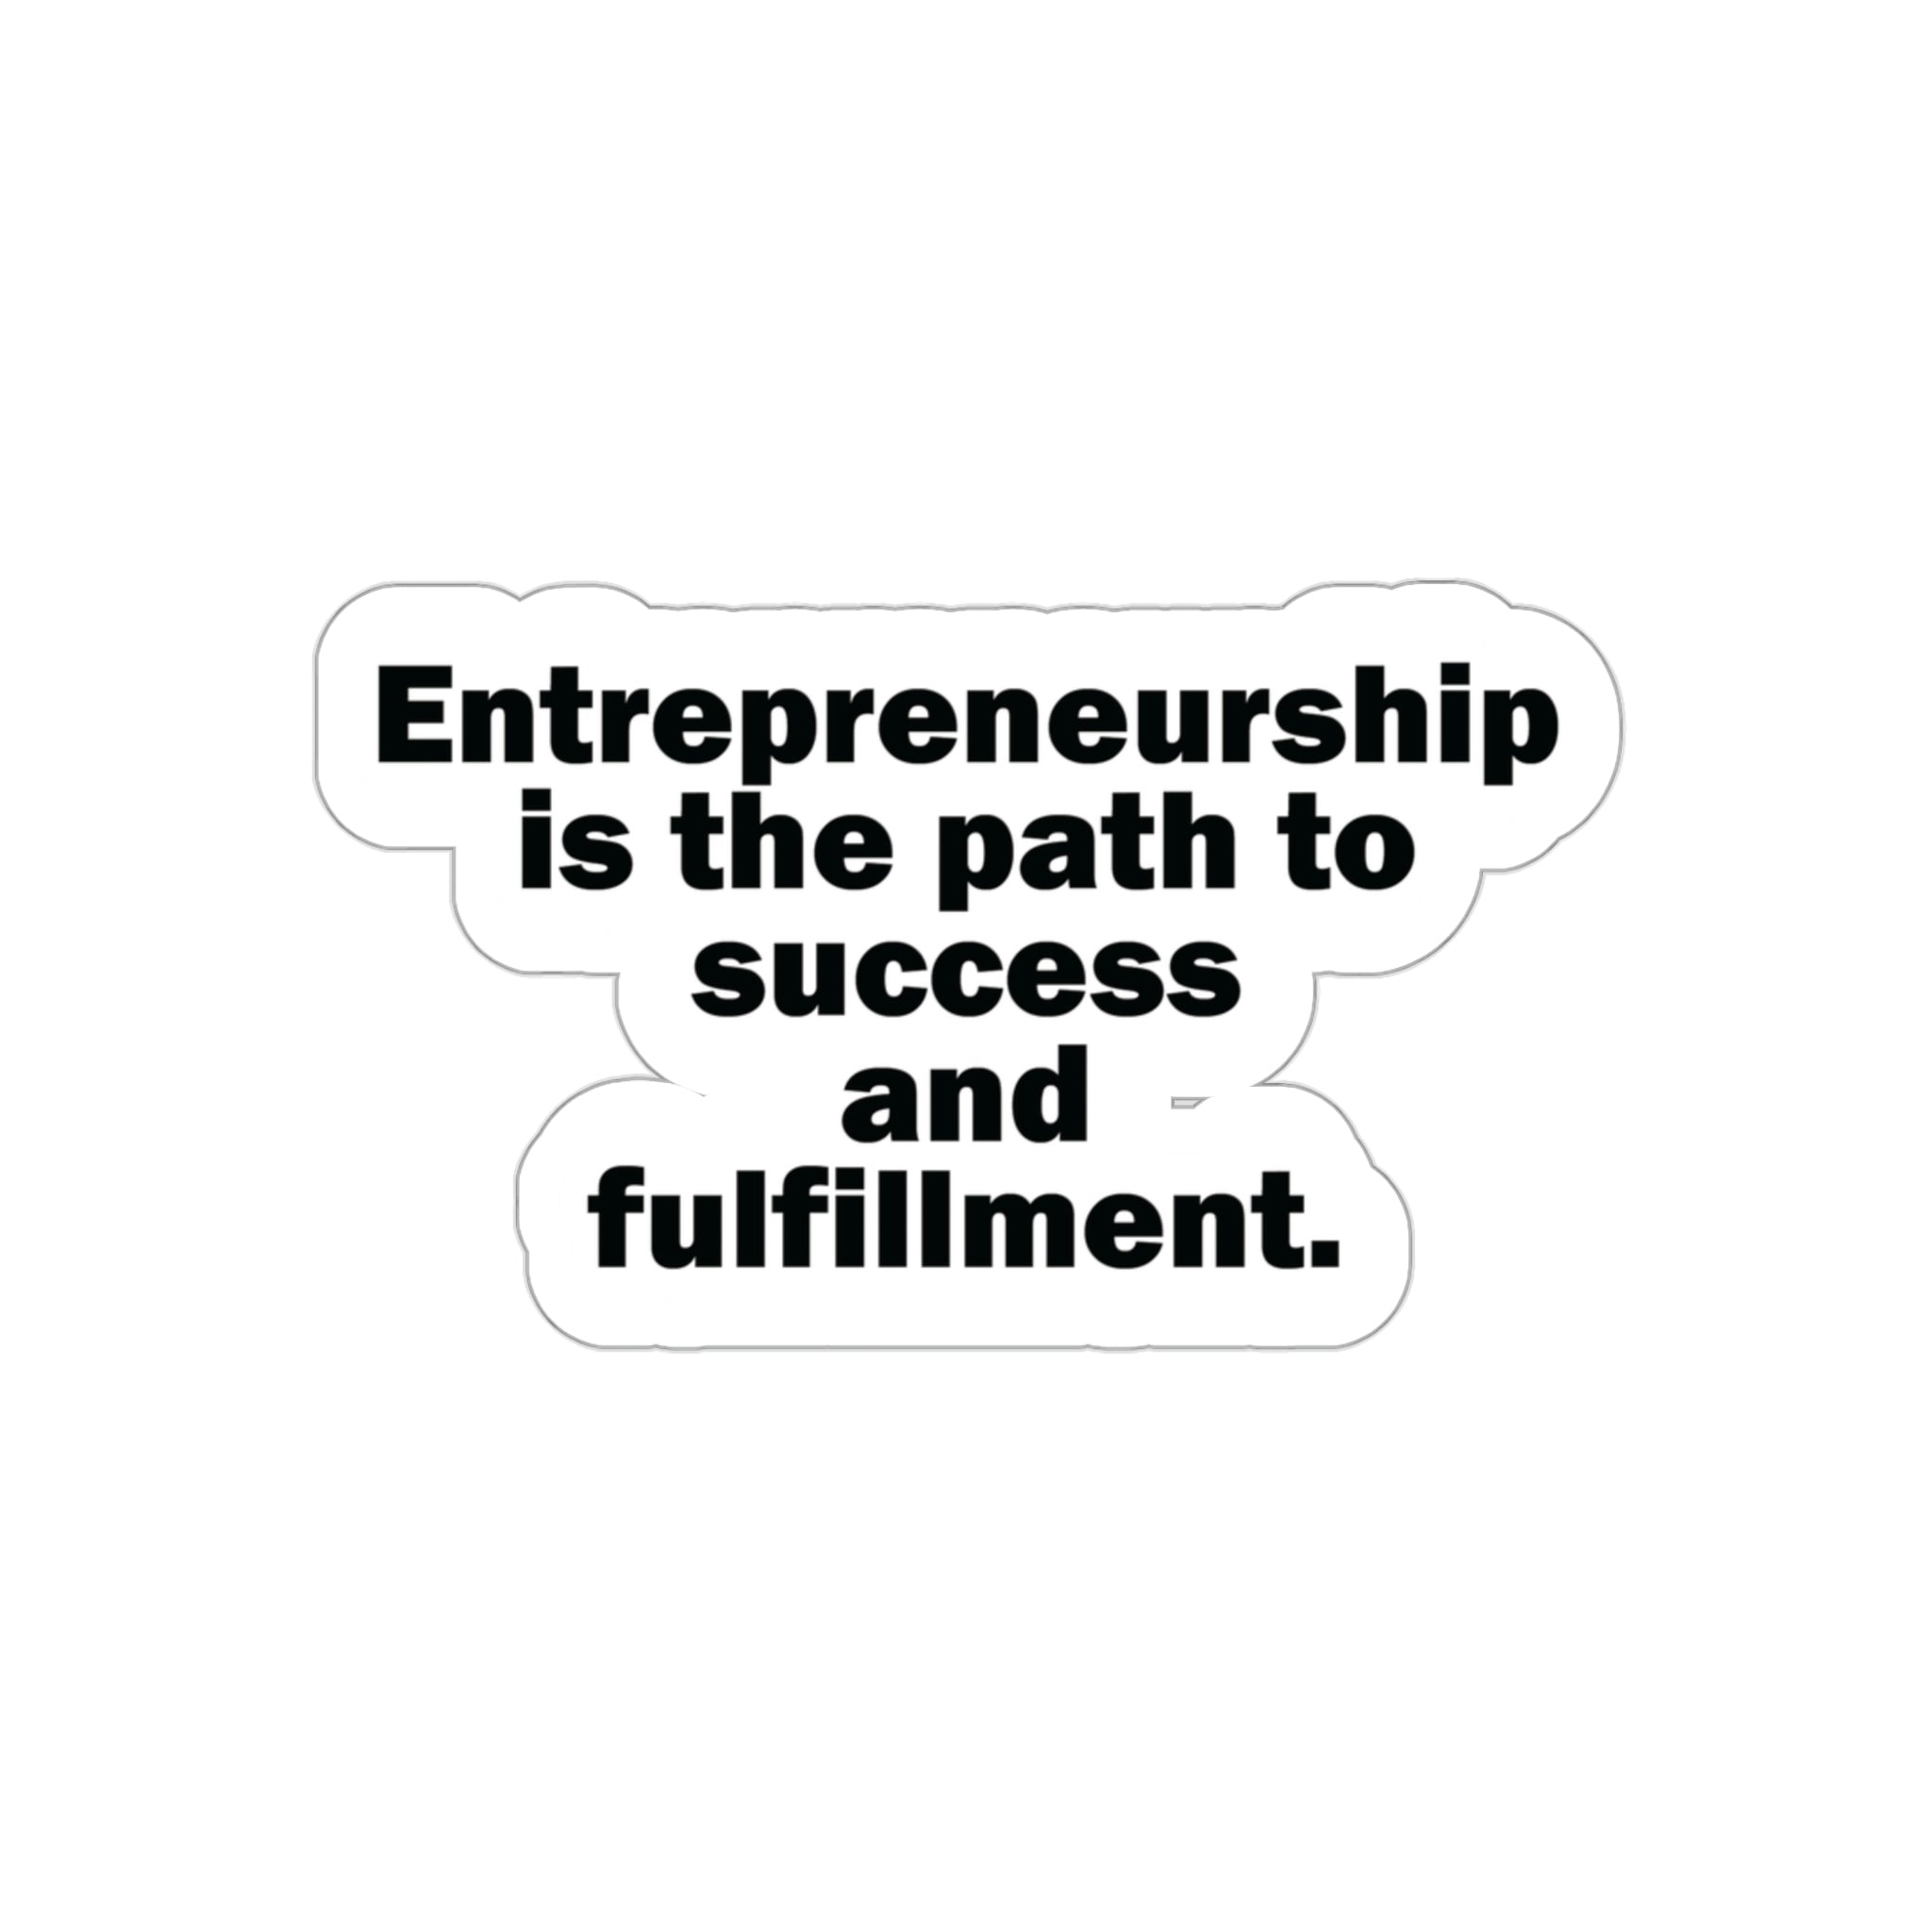 Entrepreneurship: The Path to Success and Fulfillment | Shop Now  #size_3x3-inches